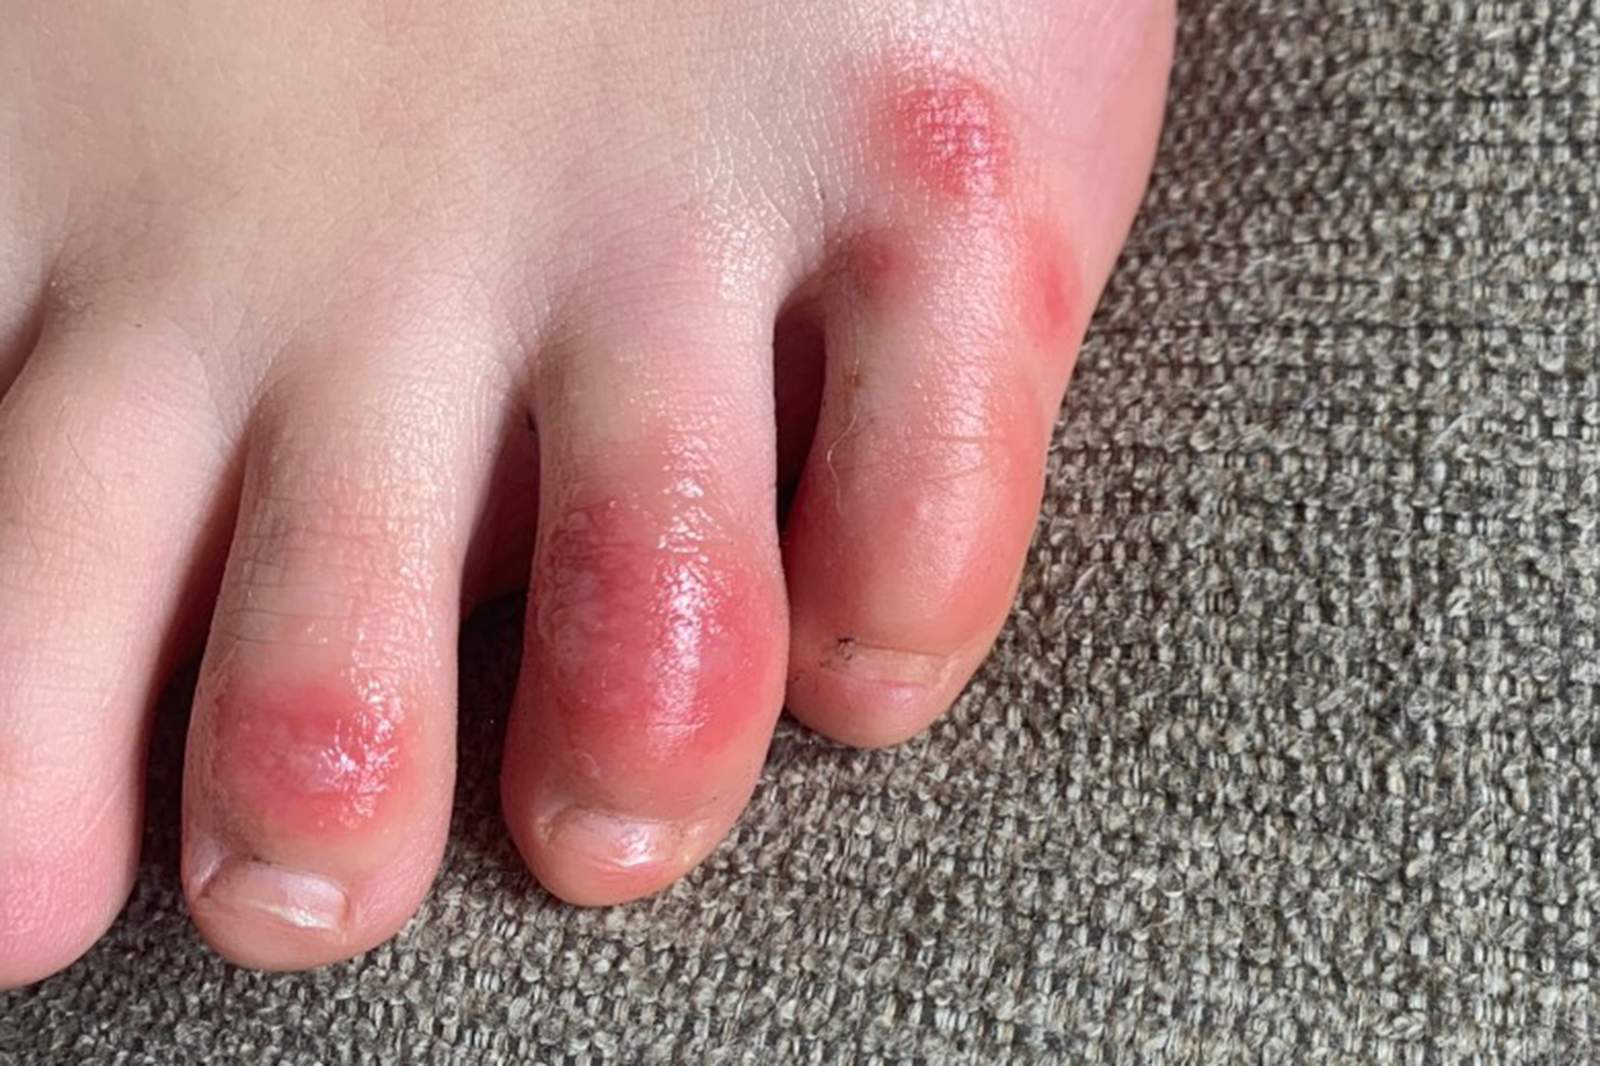 New research finds that ‘COVID toes’ could last for 150 days